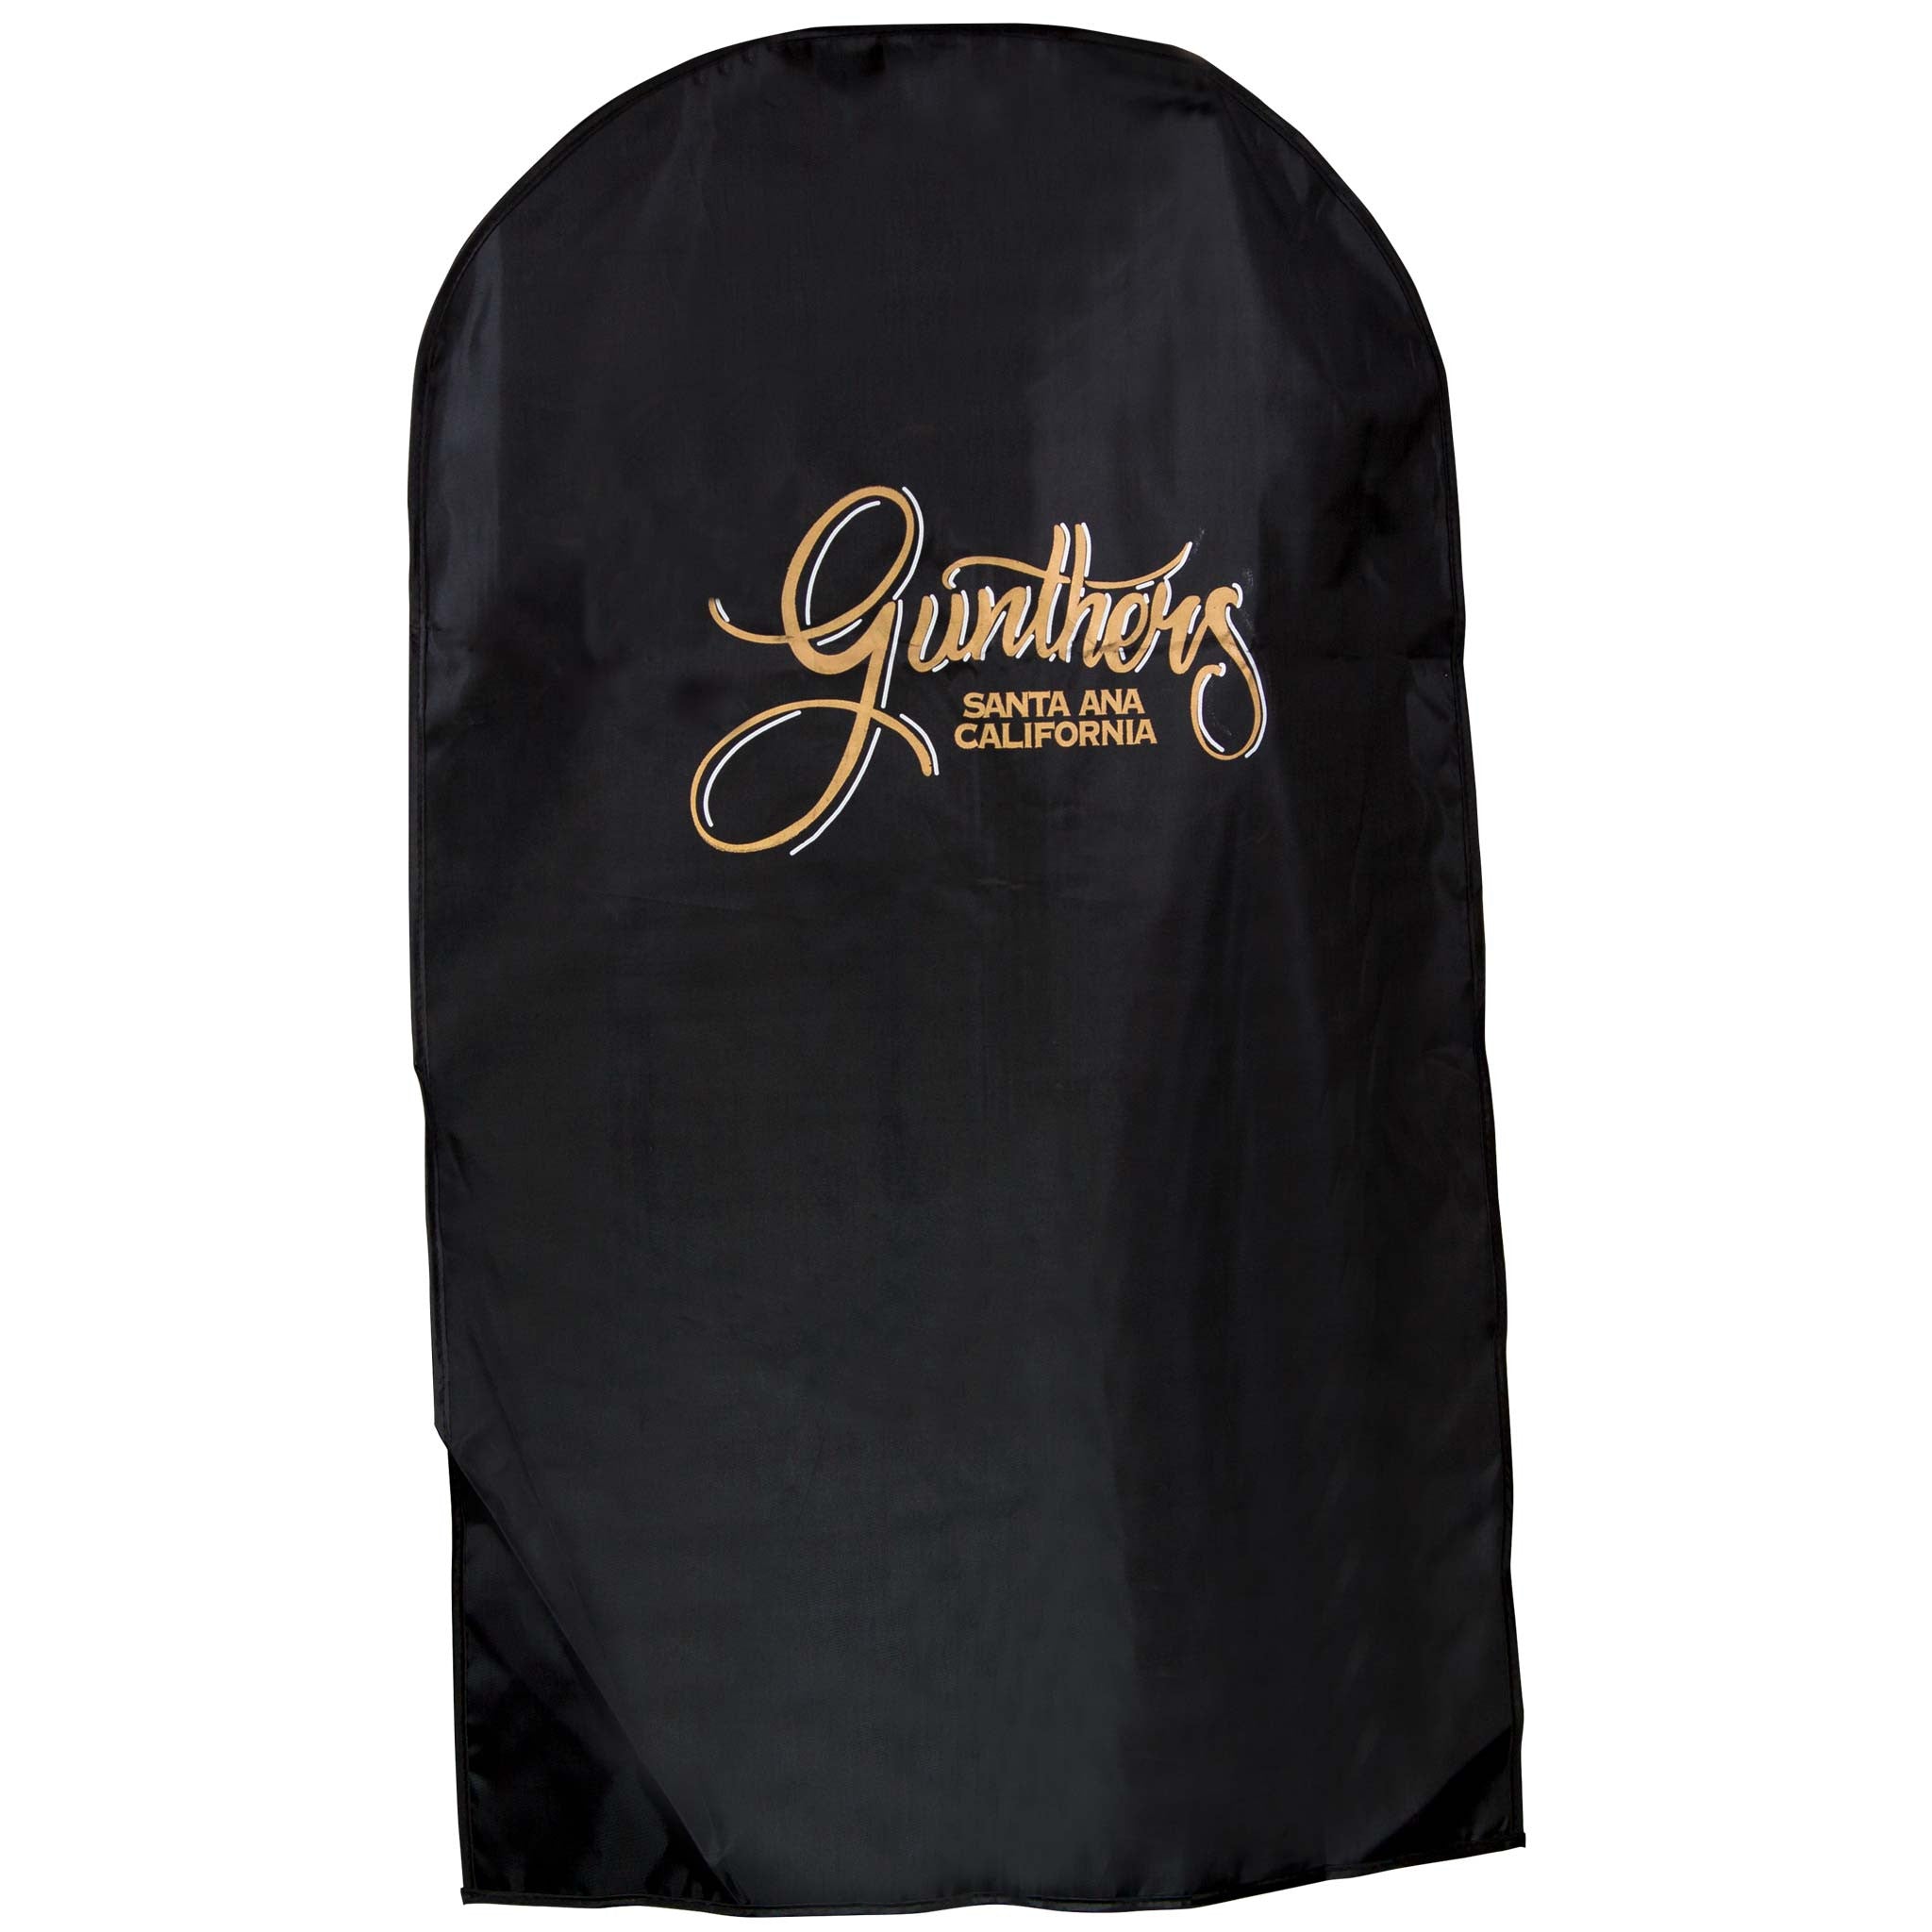 Garment Bag from gunthers for long term storage of clothing